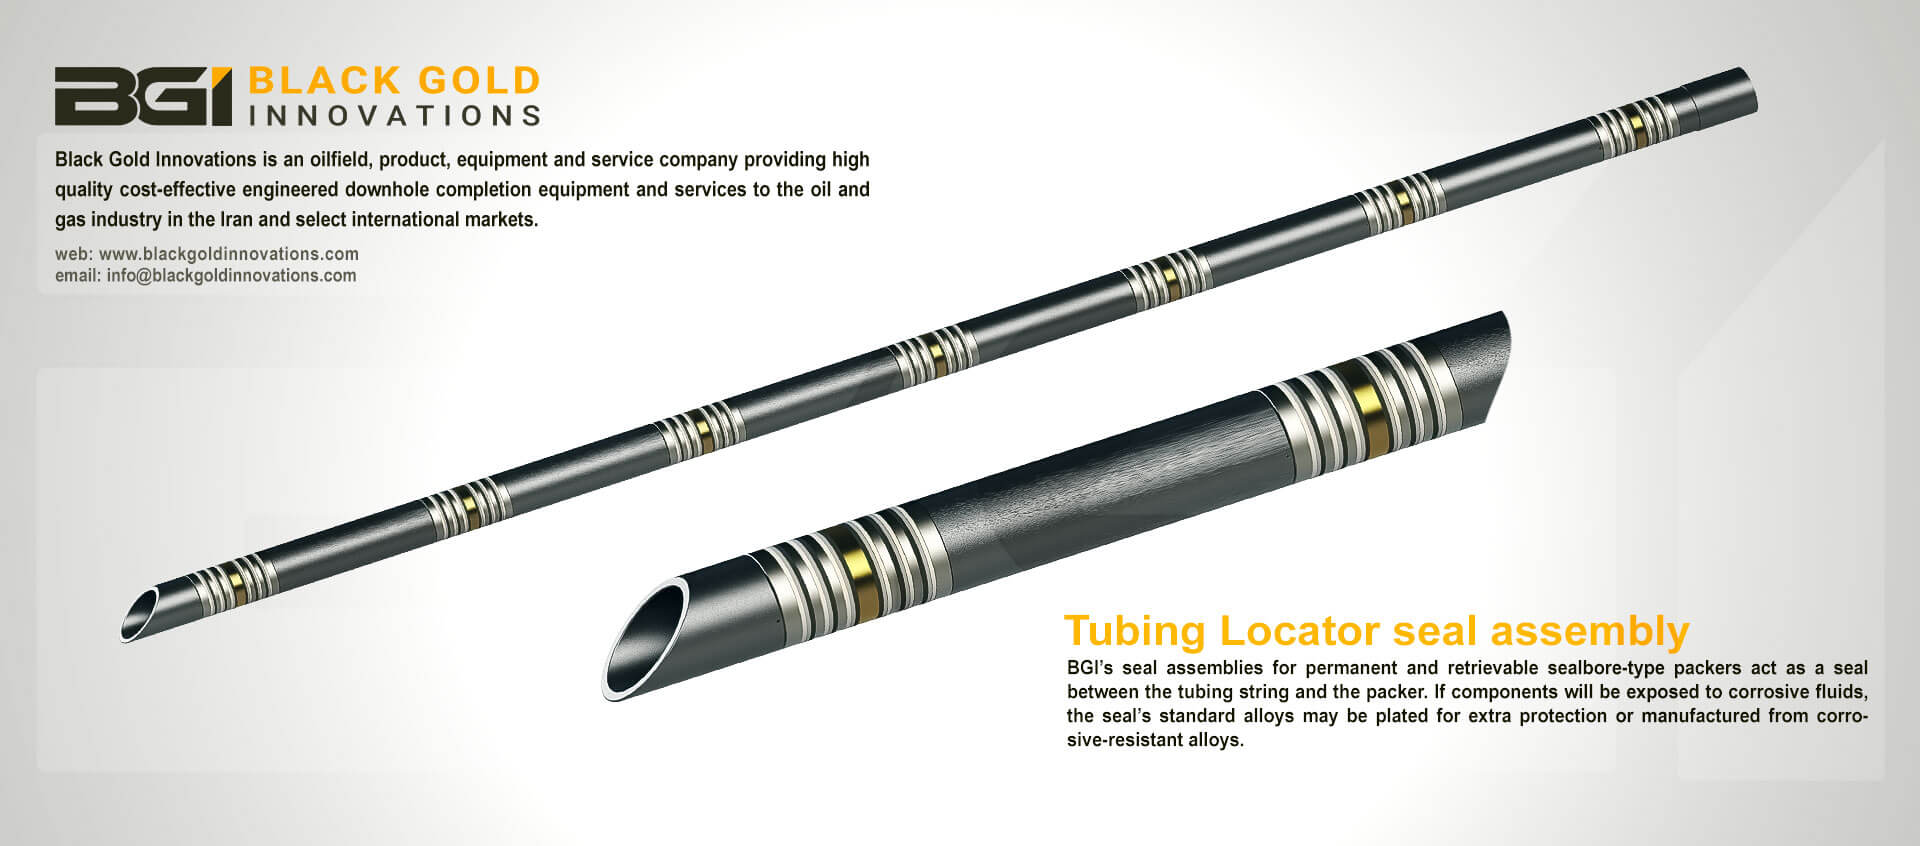 PACKER SYSTEM TOOLS-Tubing Locator seal assembly